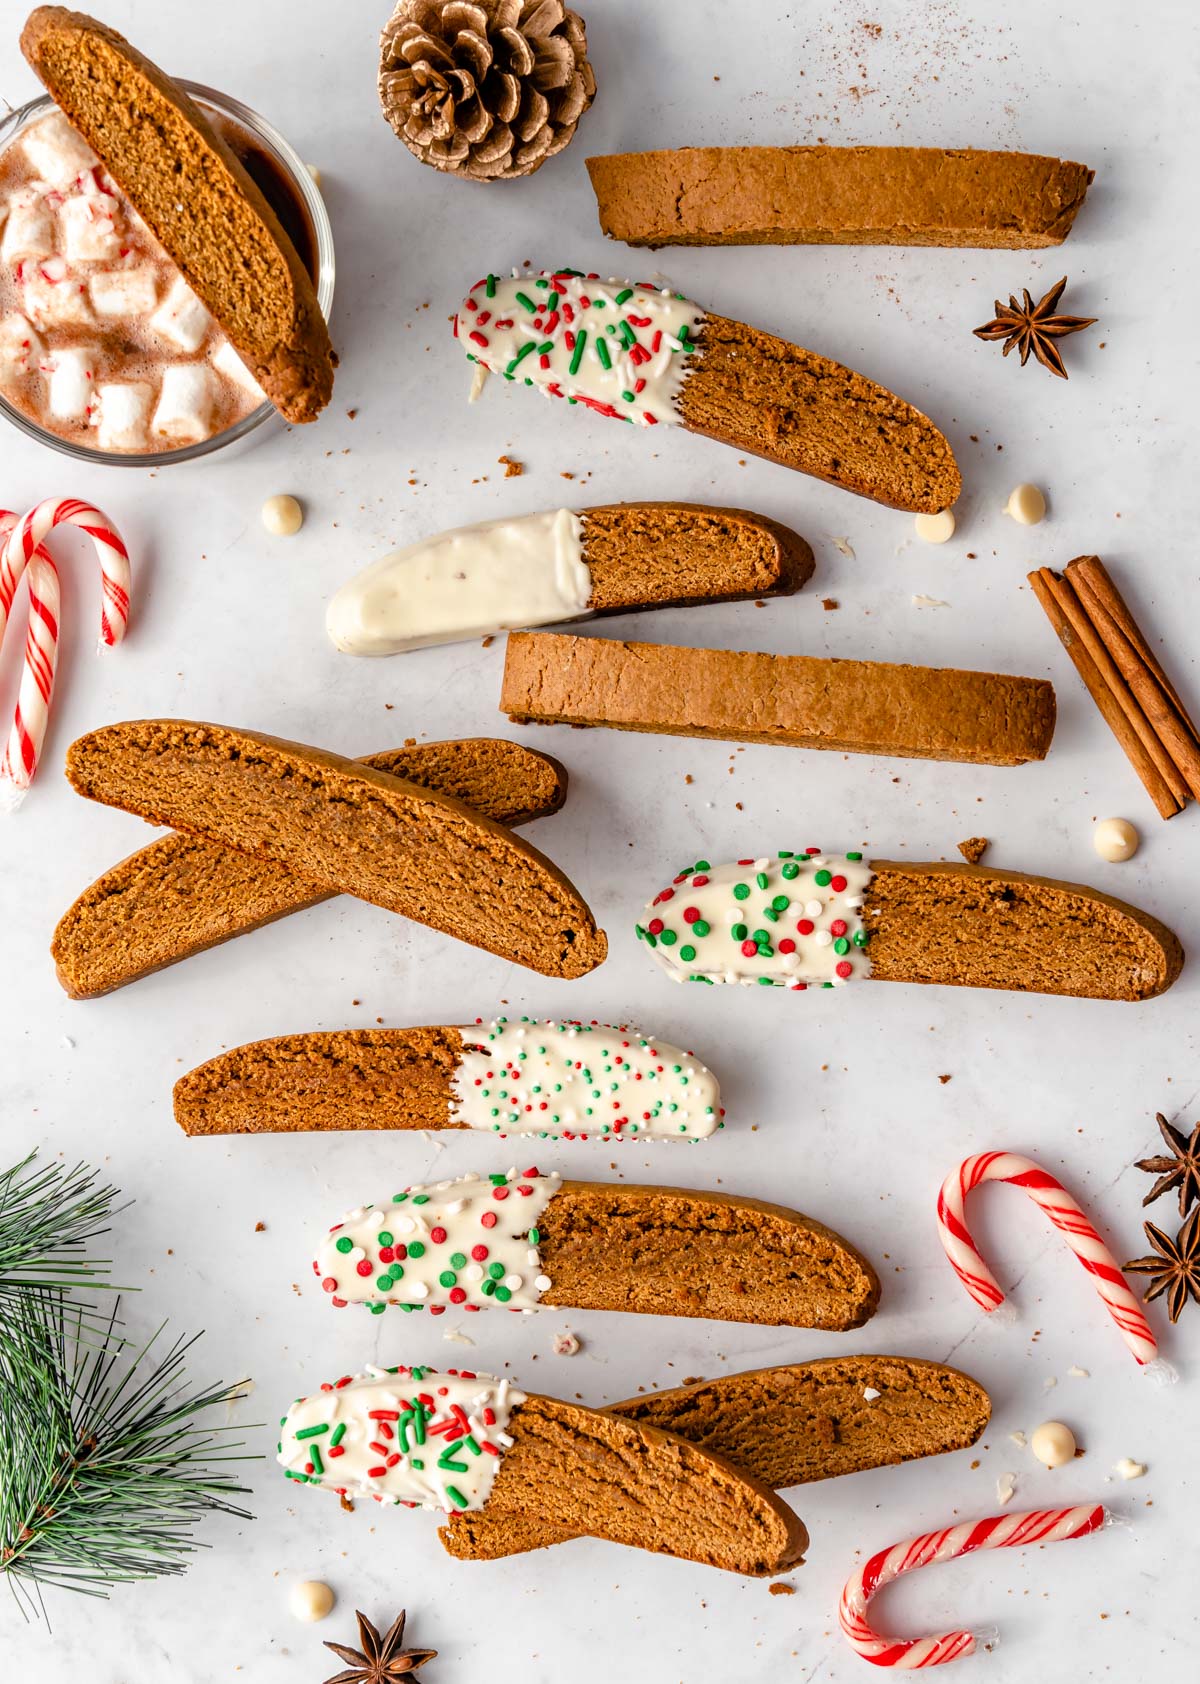 Several gingerbread biscotti, some dipped in white chocolate, and a mug of hot chocolate to the side.